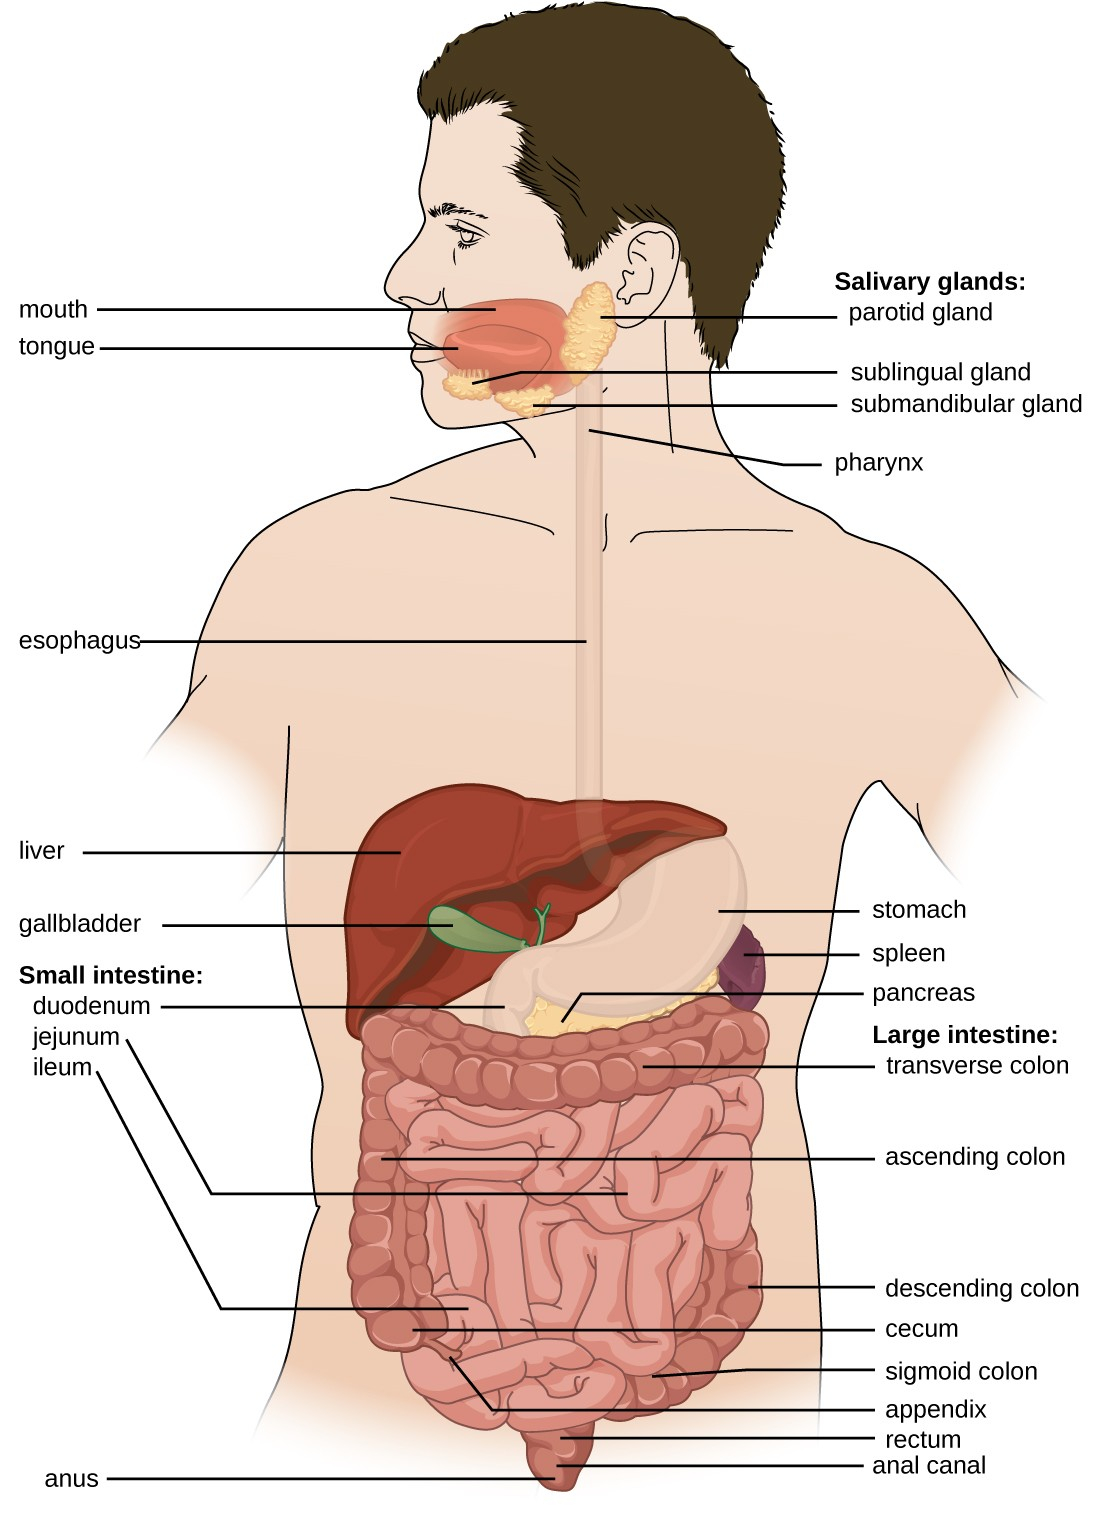 Diagram Of The Digestive System Anatomy And Normal Microbiota Of The Digestive System Microbiology